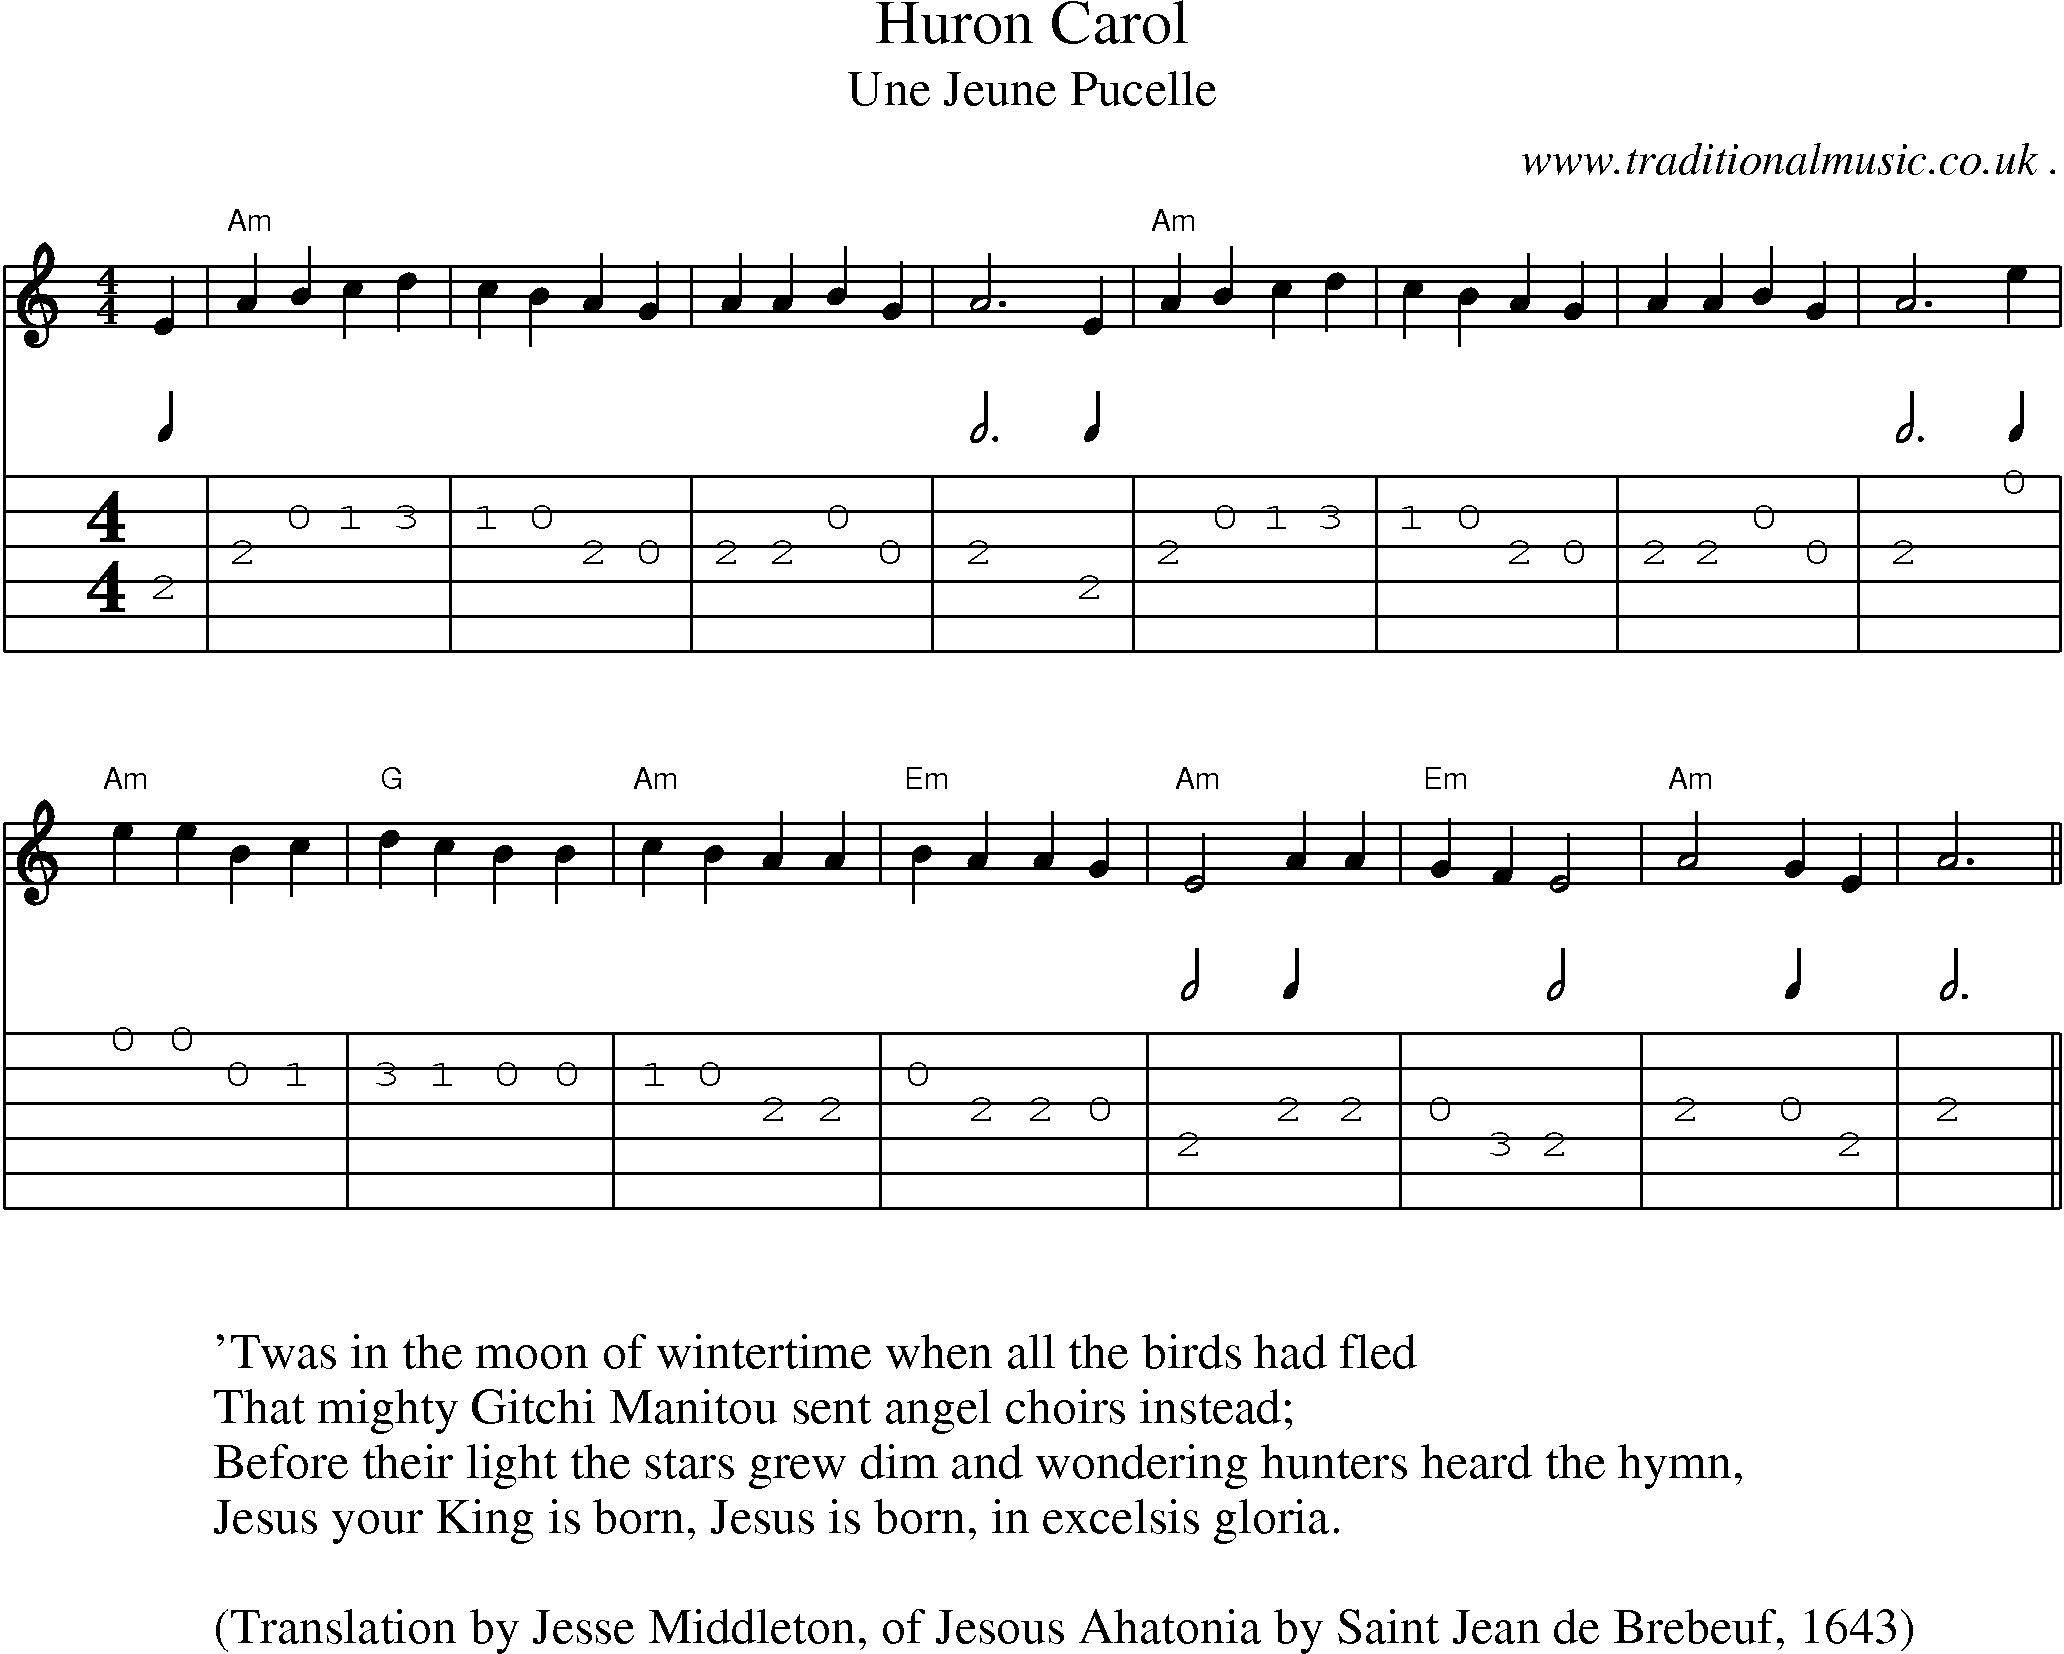 Common session tunes, Scores and Tabs for Guitar - Huron Carol